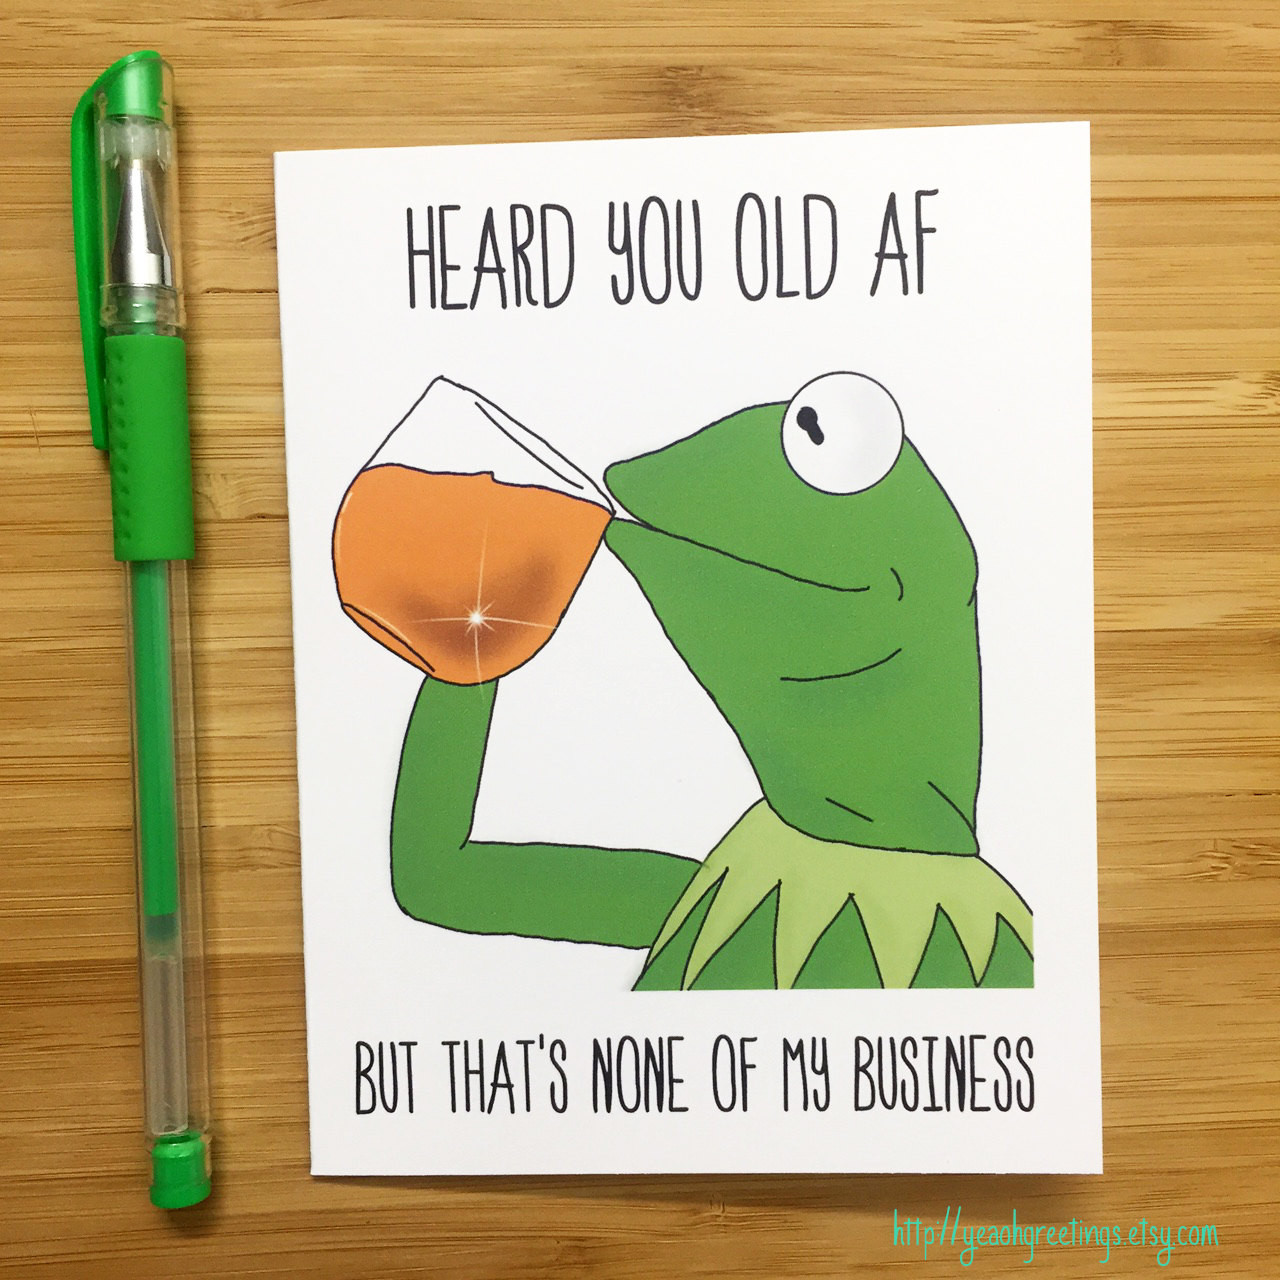 Birthday Cards Online Funny
 Funny Birthday Cards We Need Fun